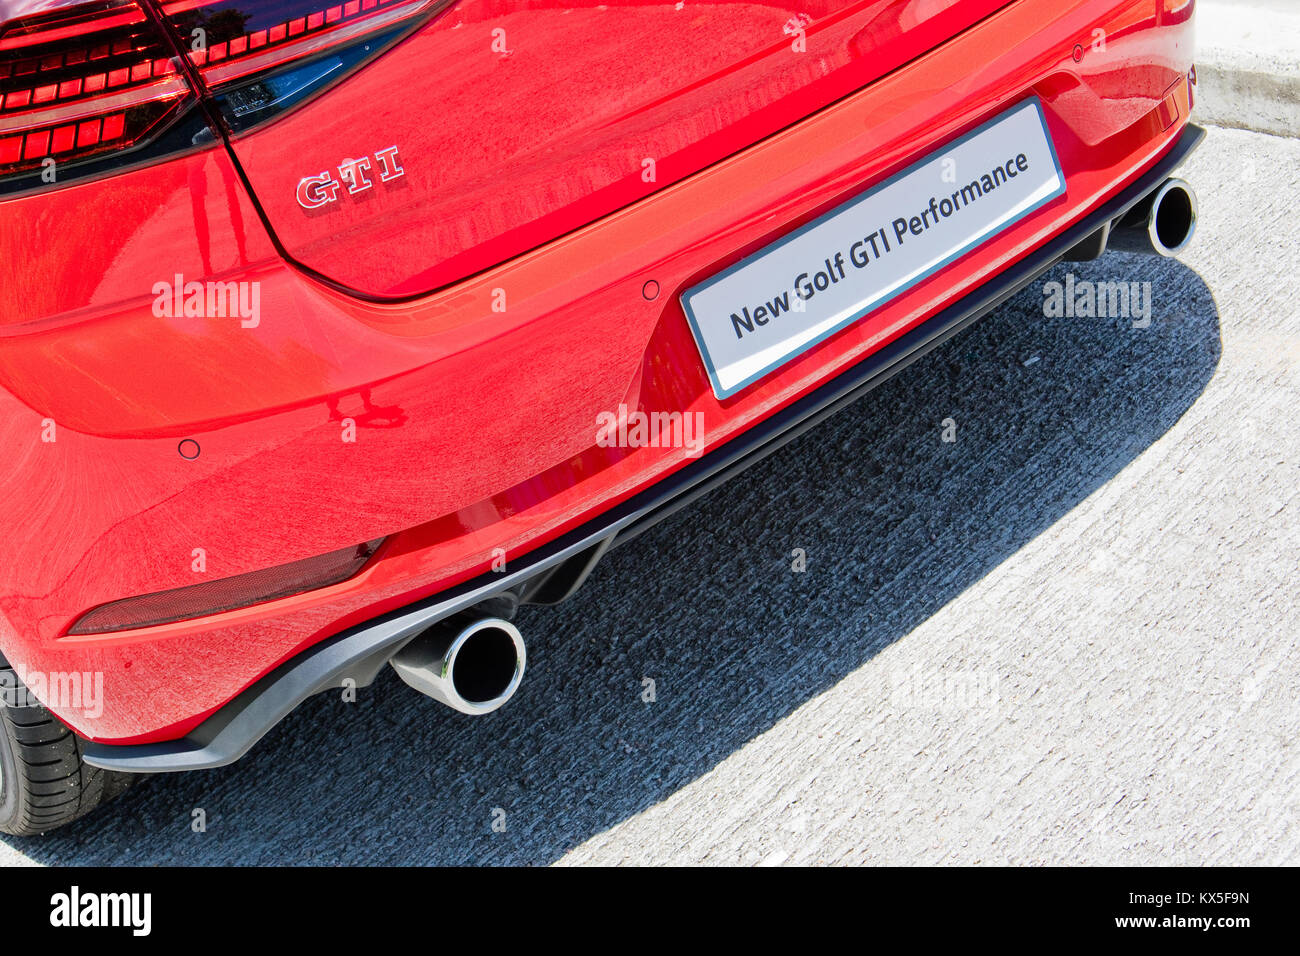 Page 4 - Volkswagen Golf Gti High Resolution Stock Photography and Images -  Alamy